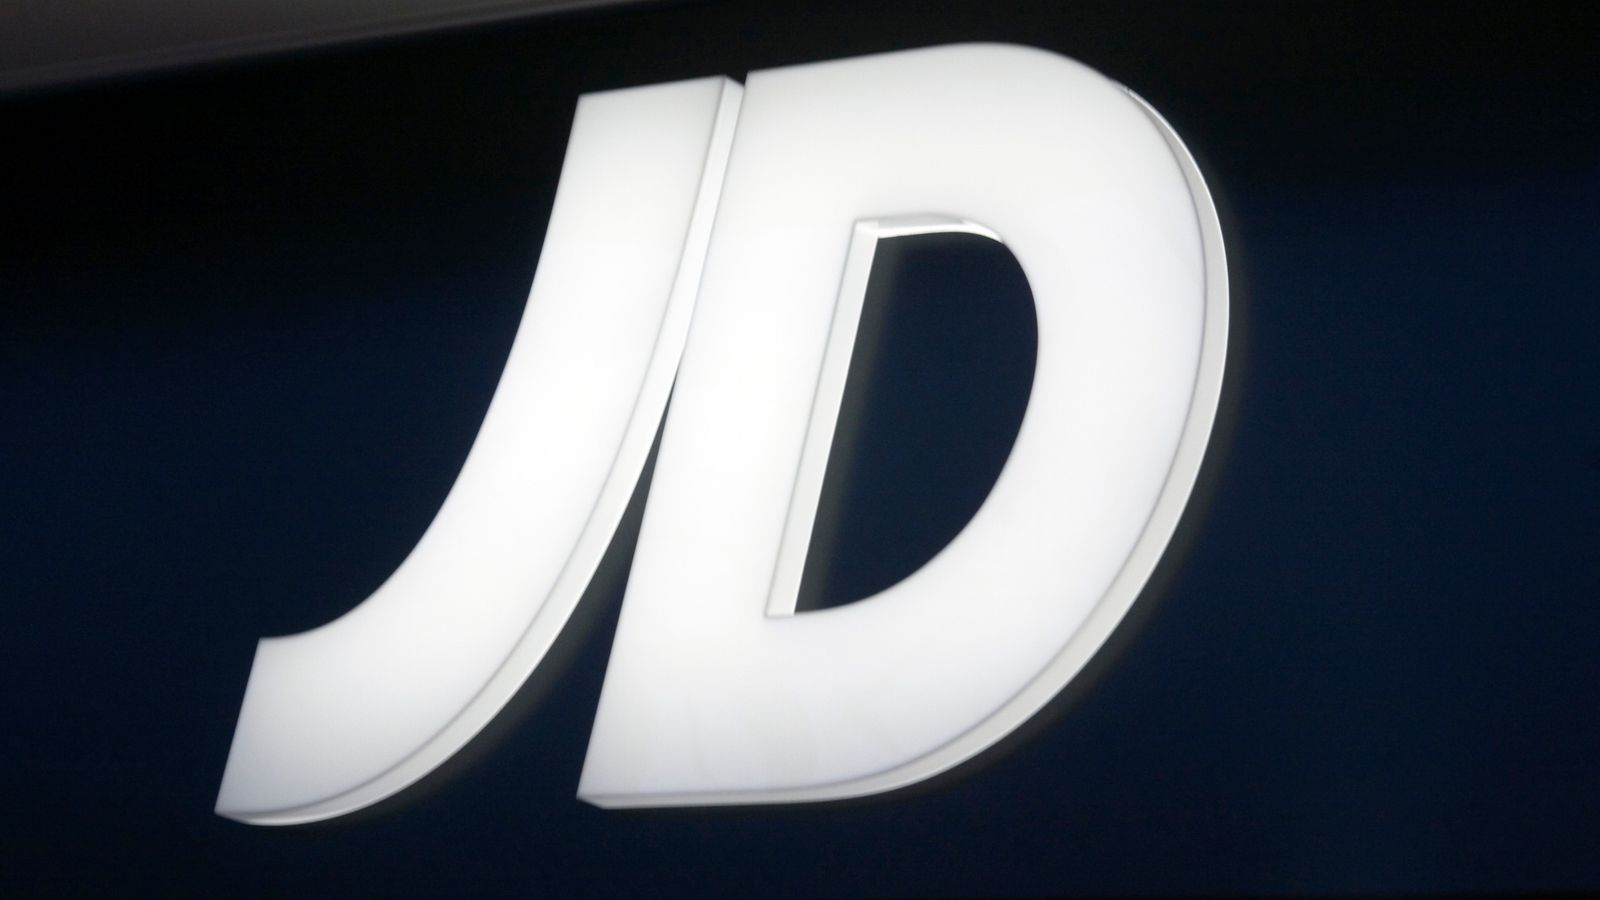 JD Sports founder Peter Cowgill ousted 'with immediate effect'